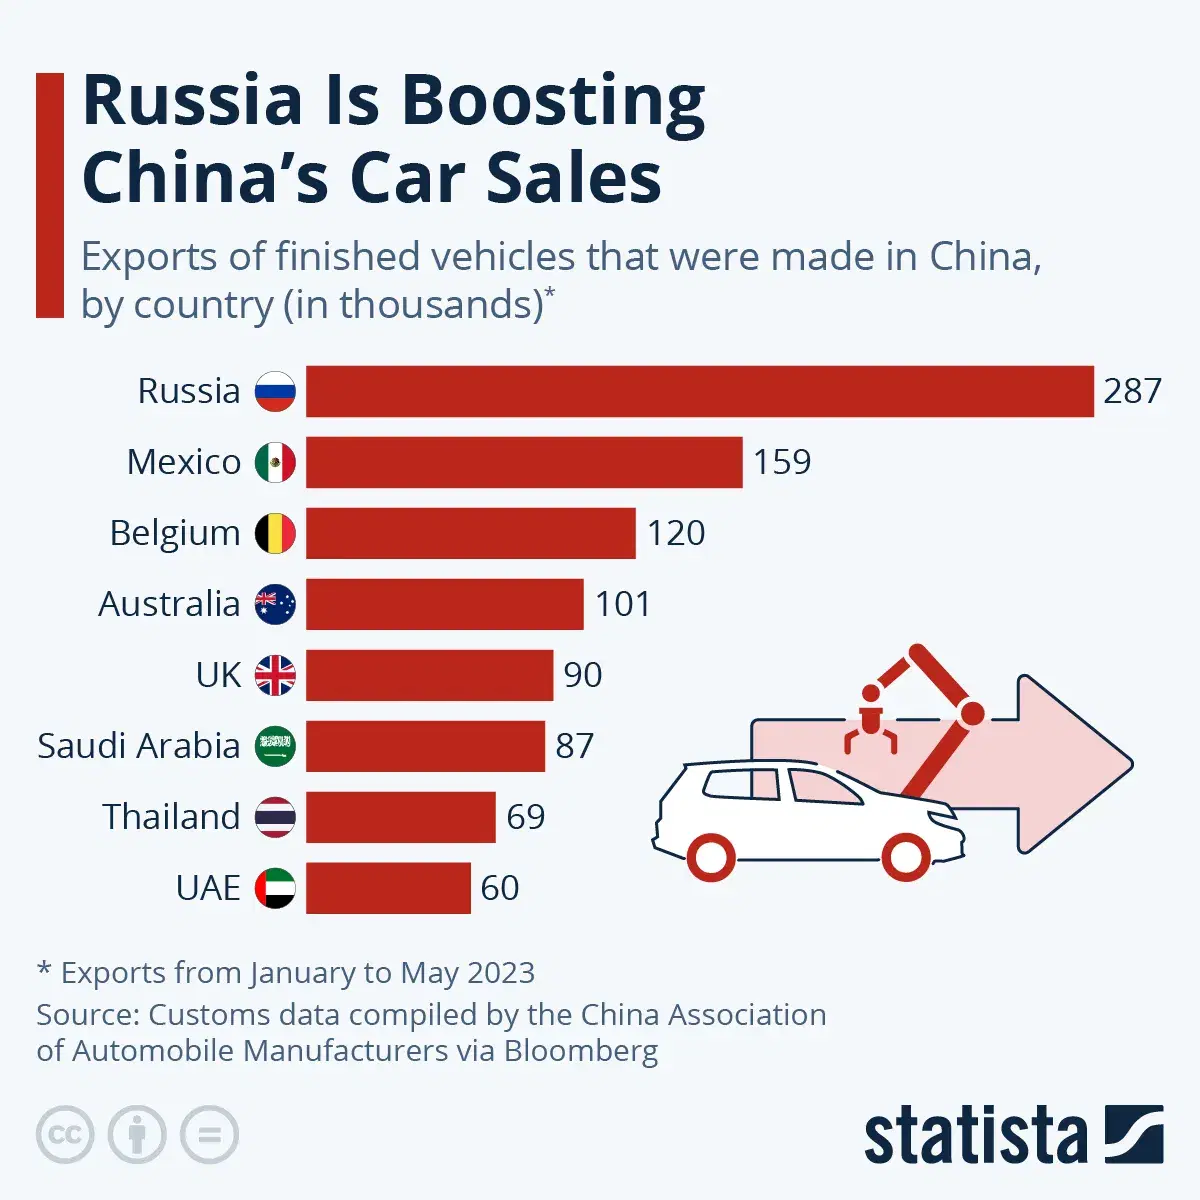 In China's International Car Sales Efforts, Russia Leads the Way